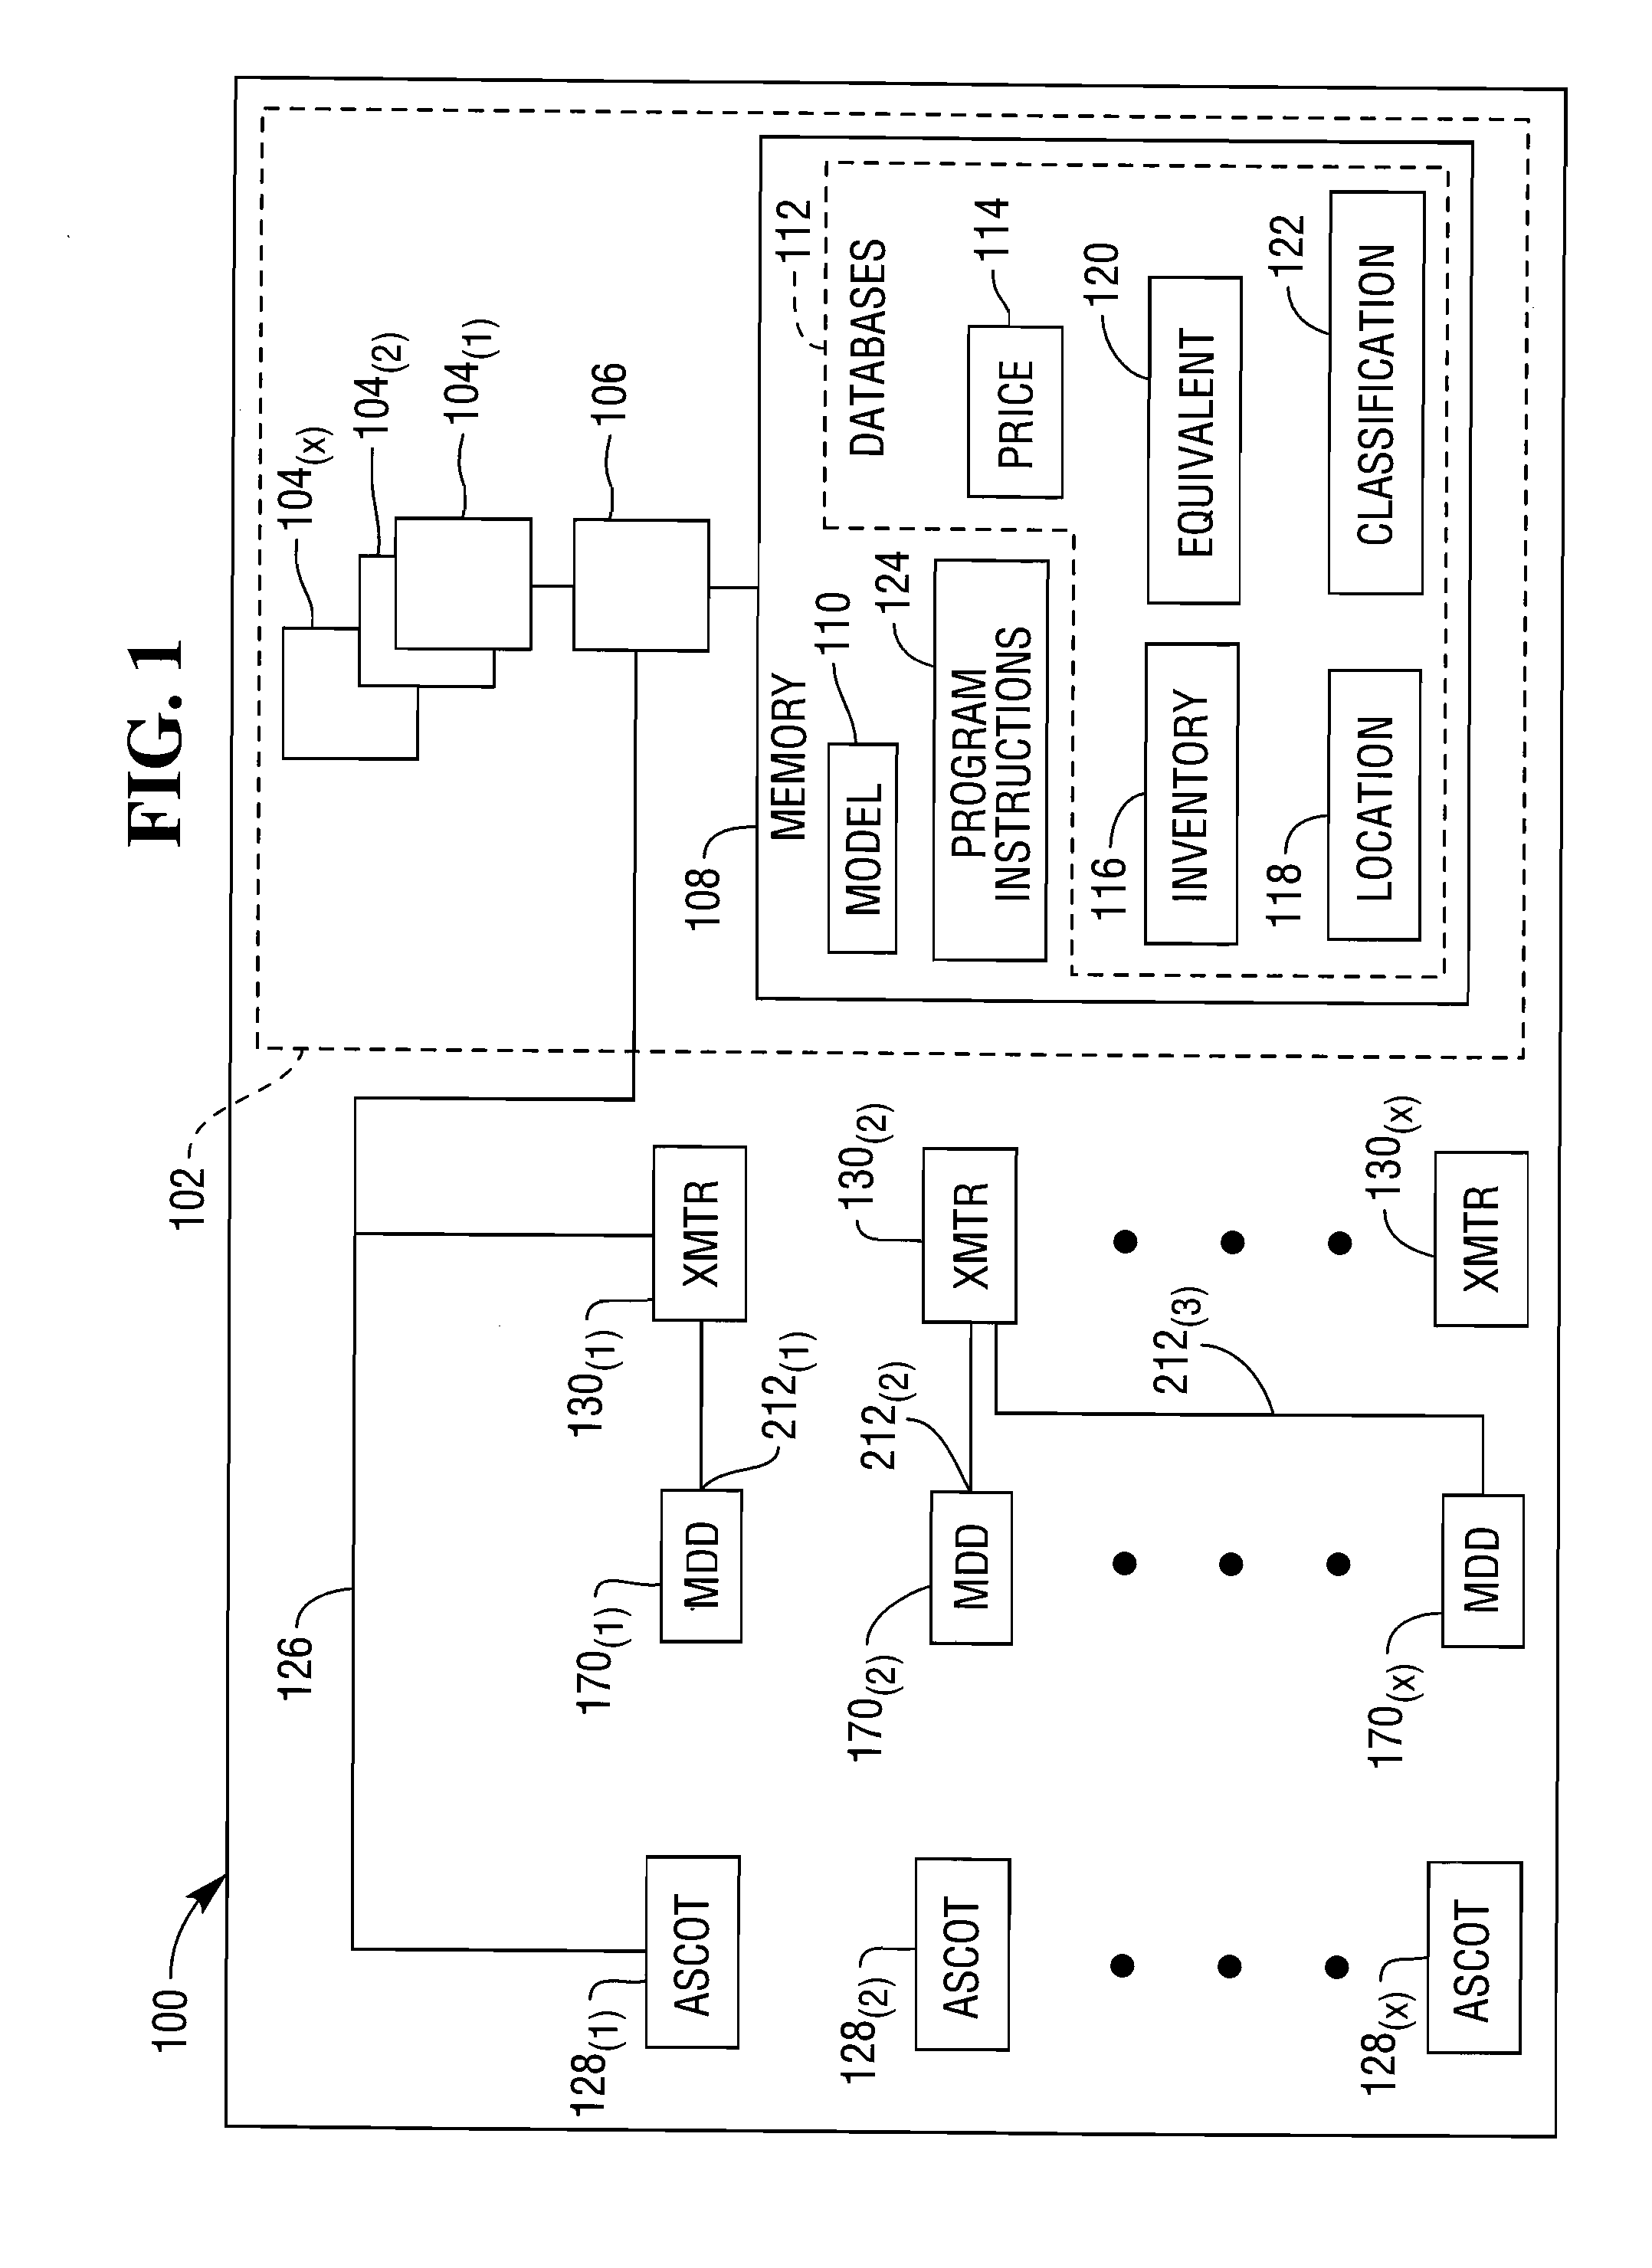 Method and apparatus for augmented reality shopping assistant